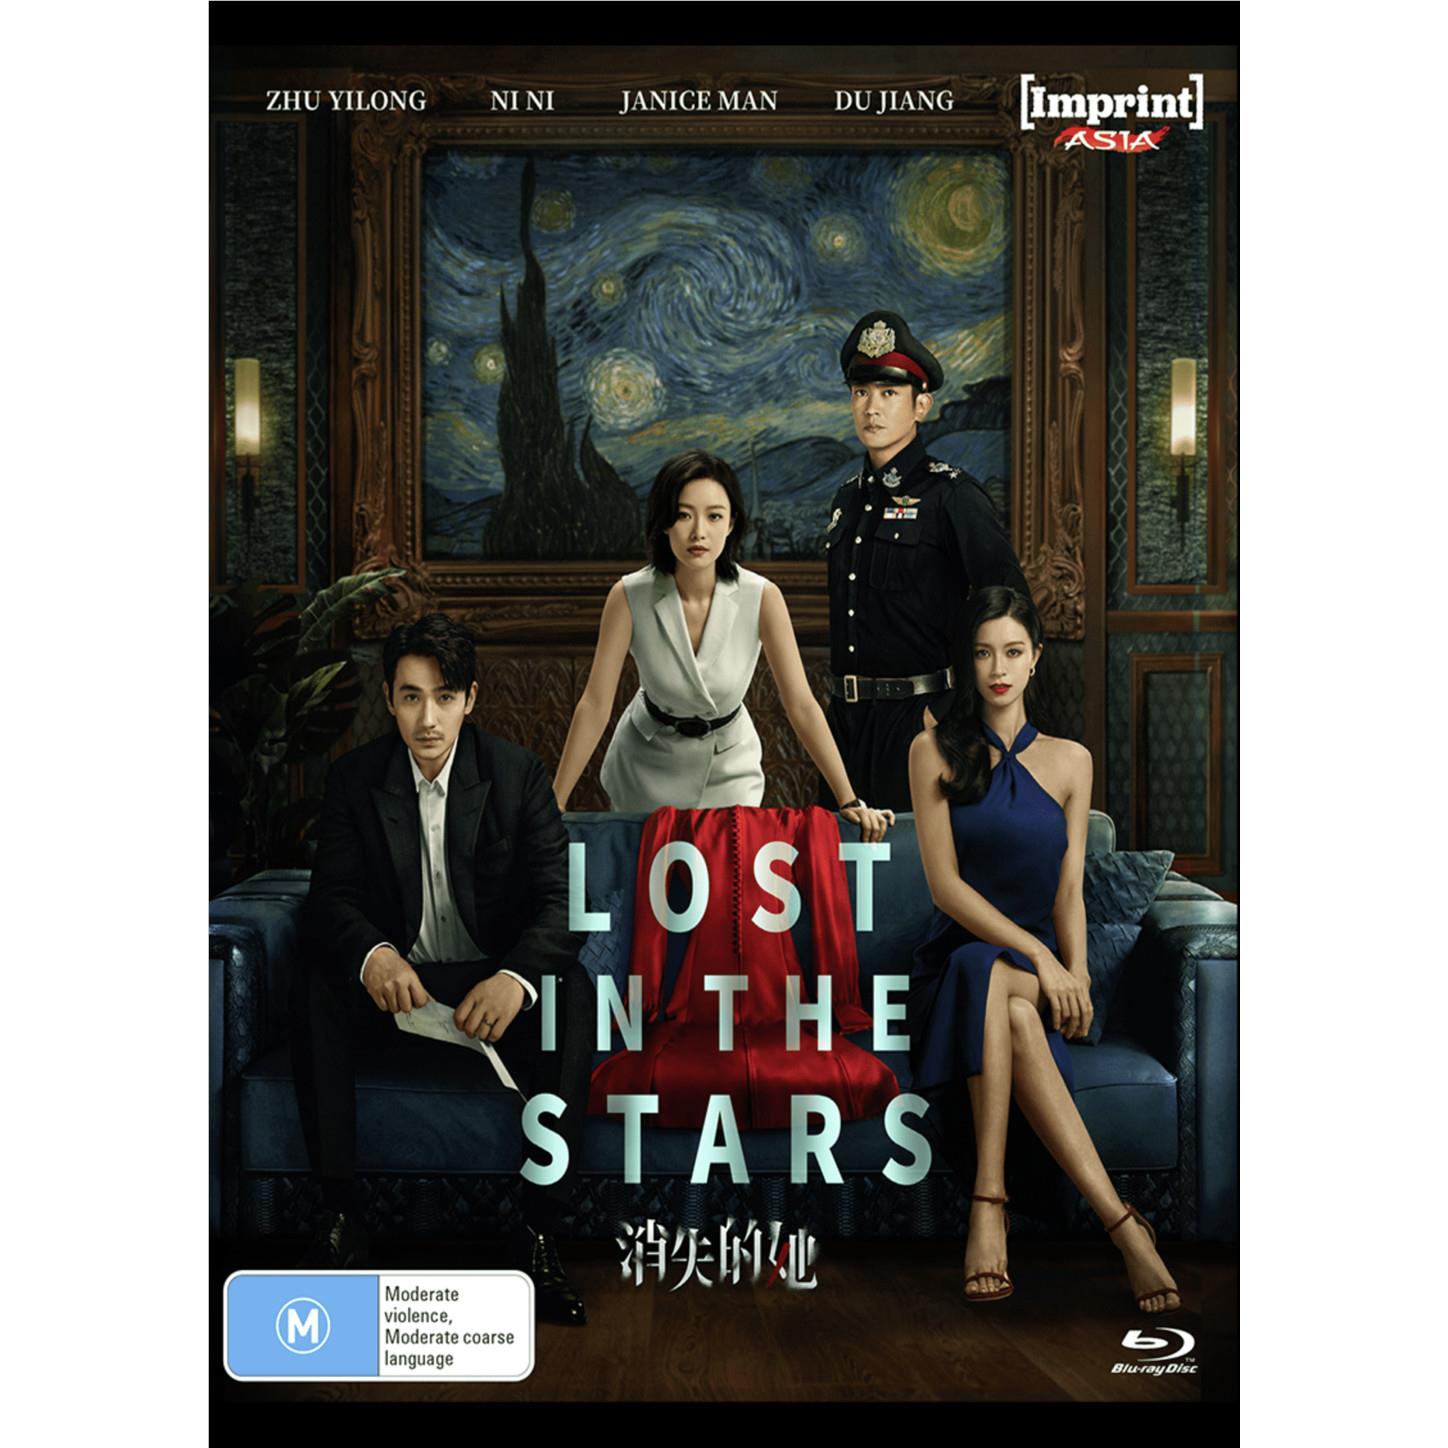 lost in the stars (imprint asia collection)